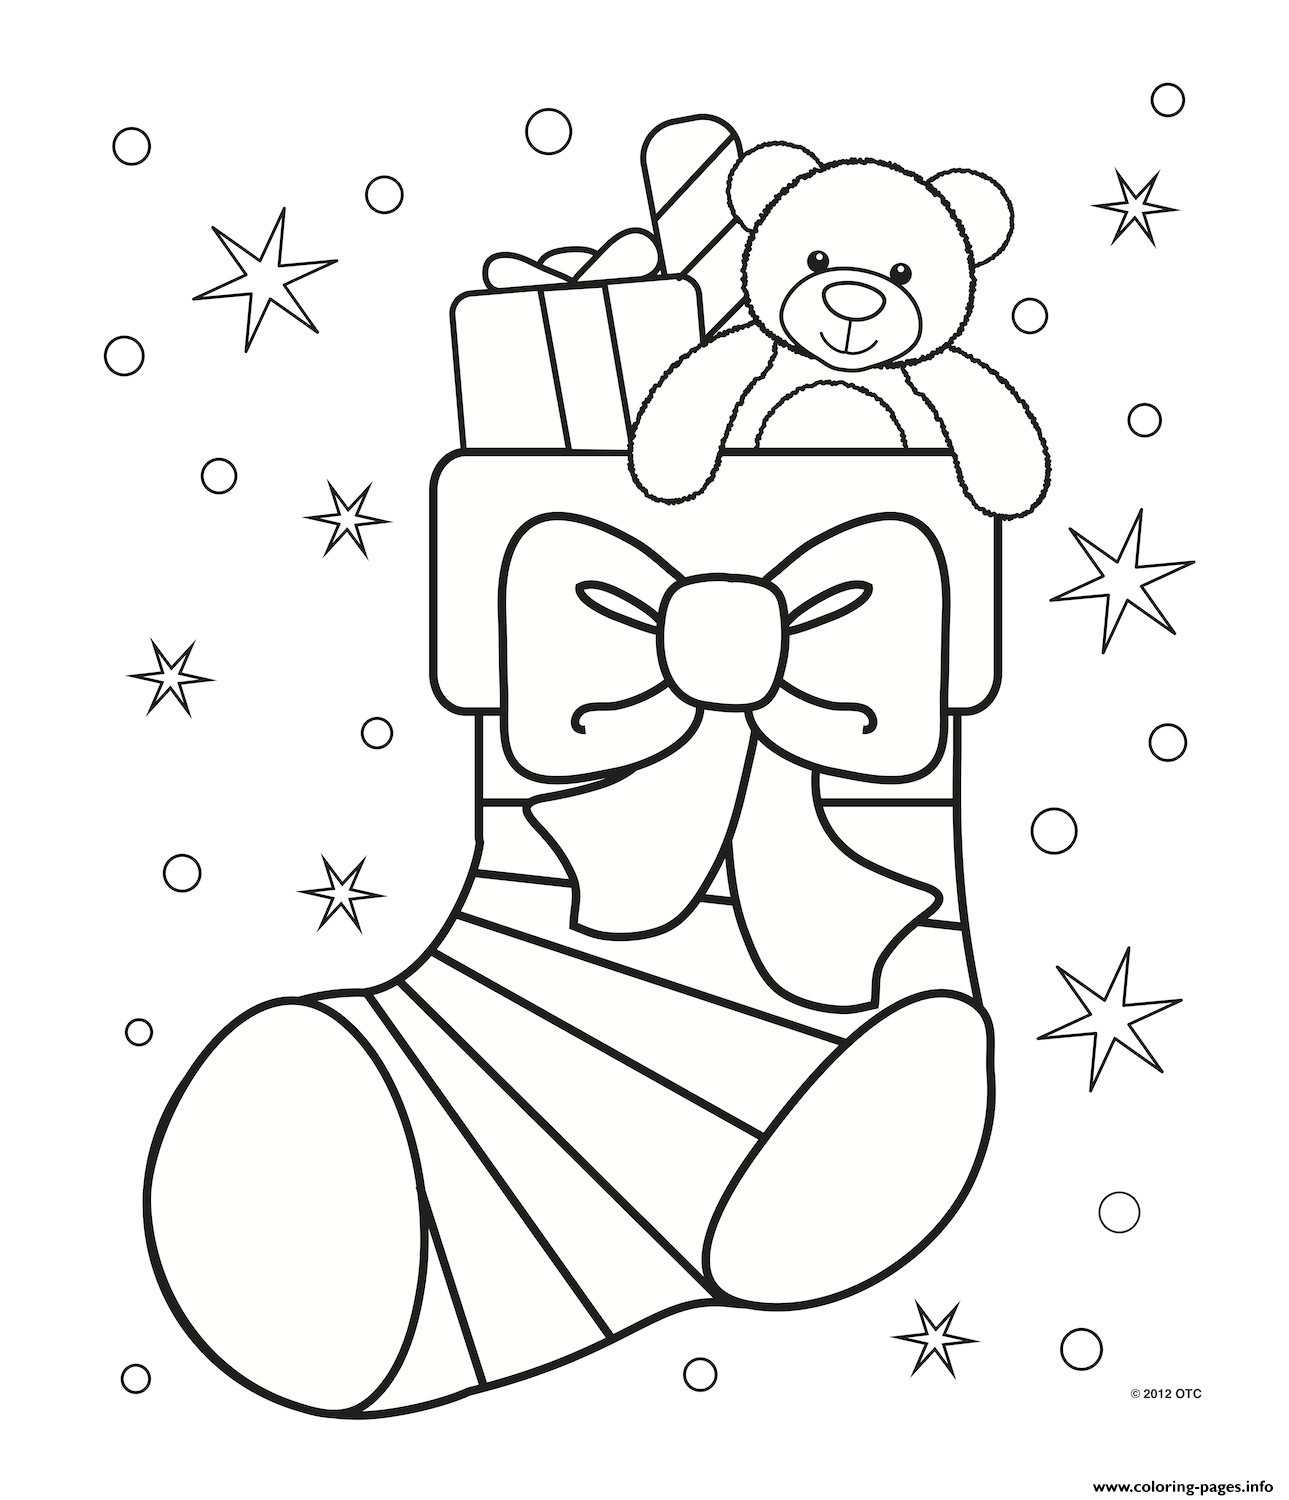 xchristmas-stocking-cute-coloring-pages-printable